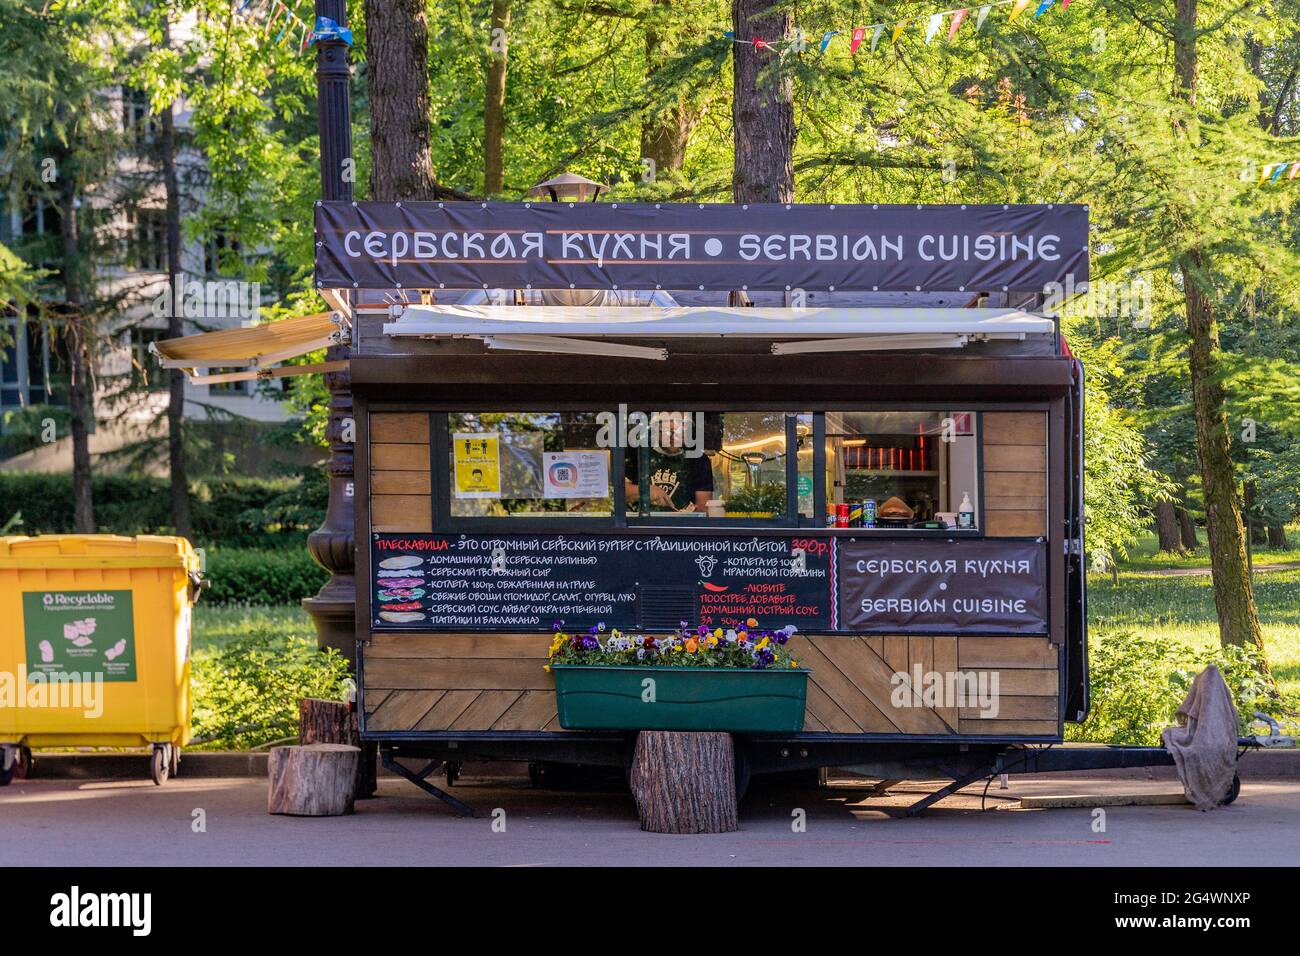 Serbian cuisine fast food kiosk made of wood in park in St Petersburg, Russia Stock Photo